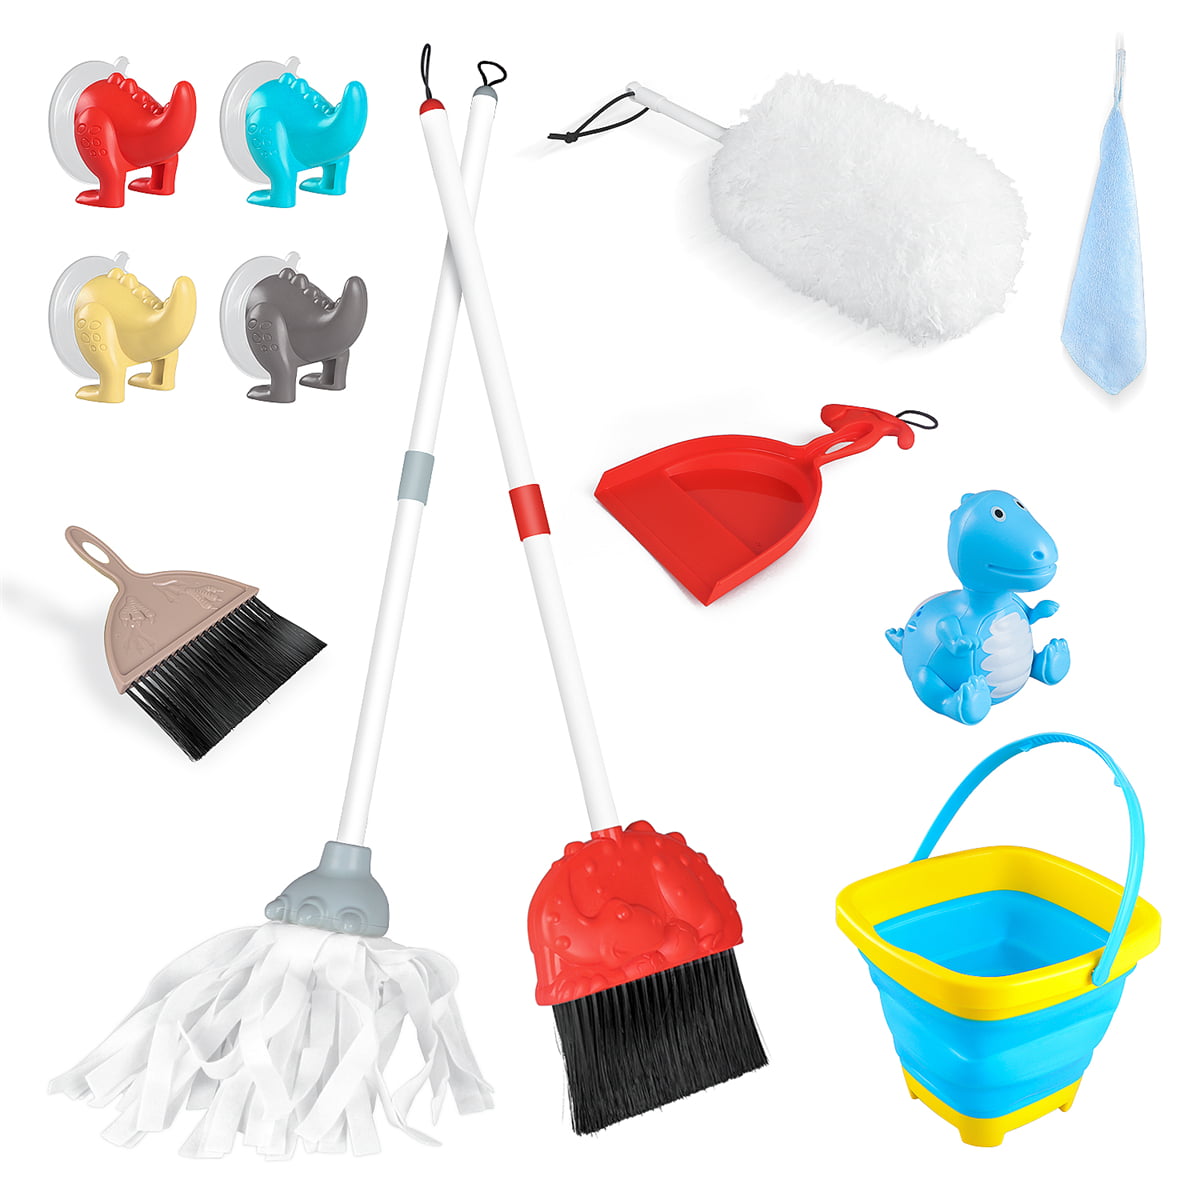 9pc Child Kids Cleaning Sweeping Play Set Mop Broom Brush Dustpan Childs Toy New 